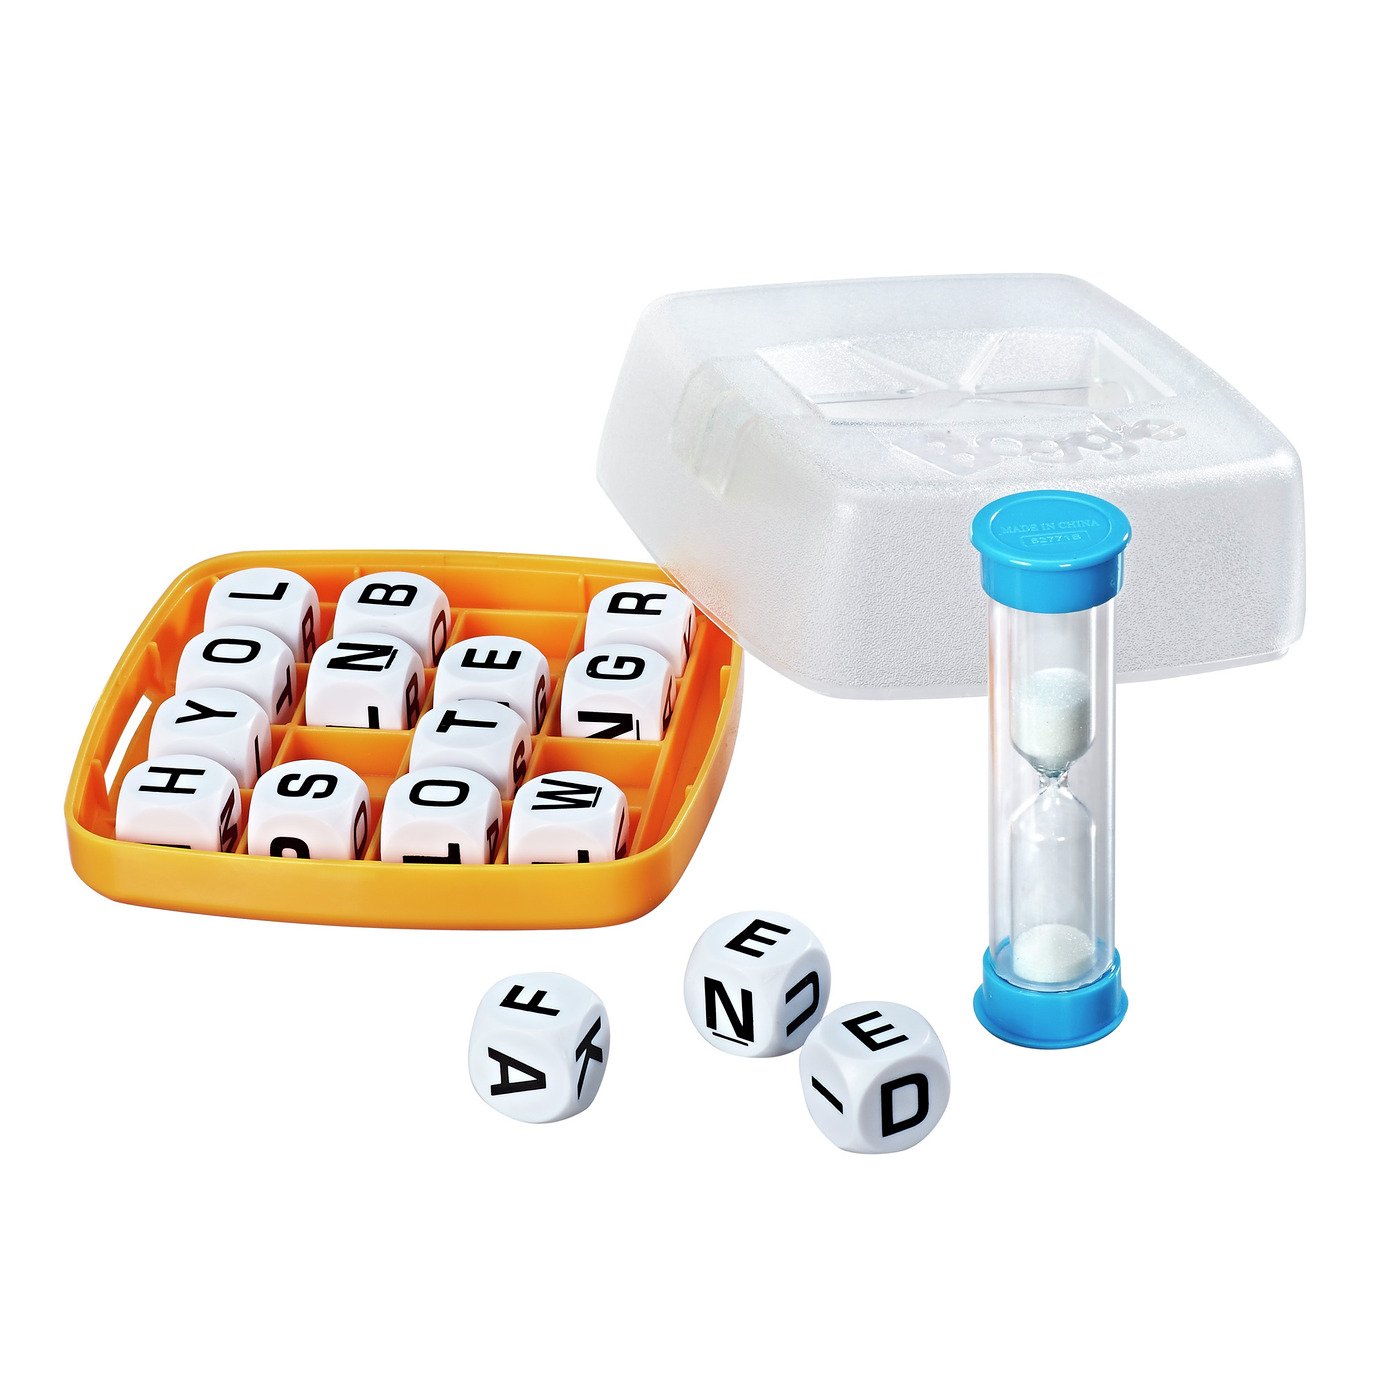 Hasbro Boggle Classic Traditional Word Letter Spelling Strategy Dice Game - 8